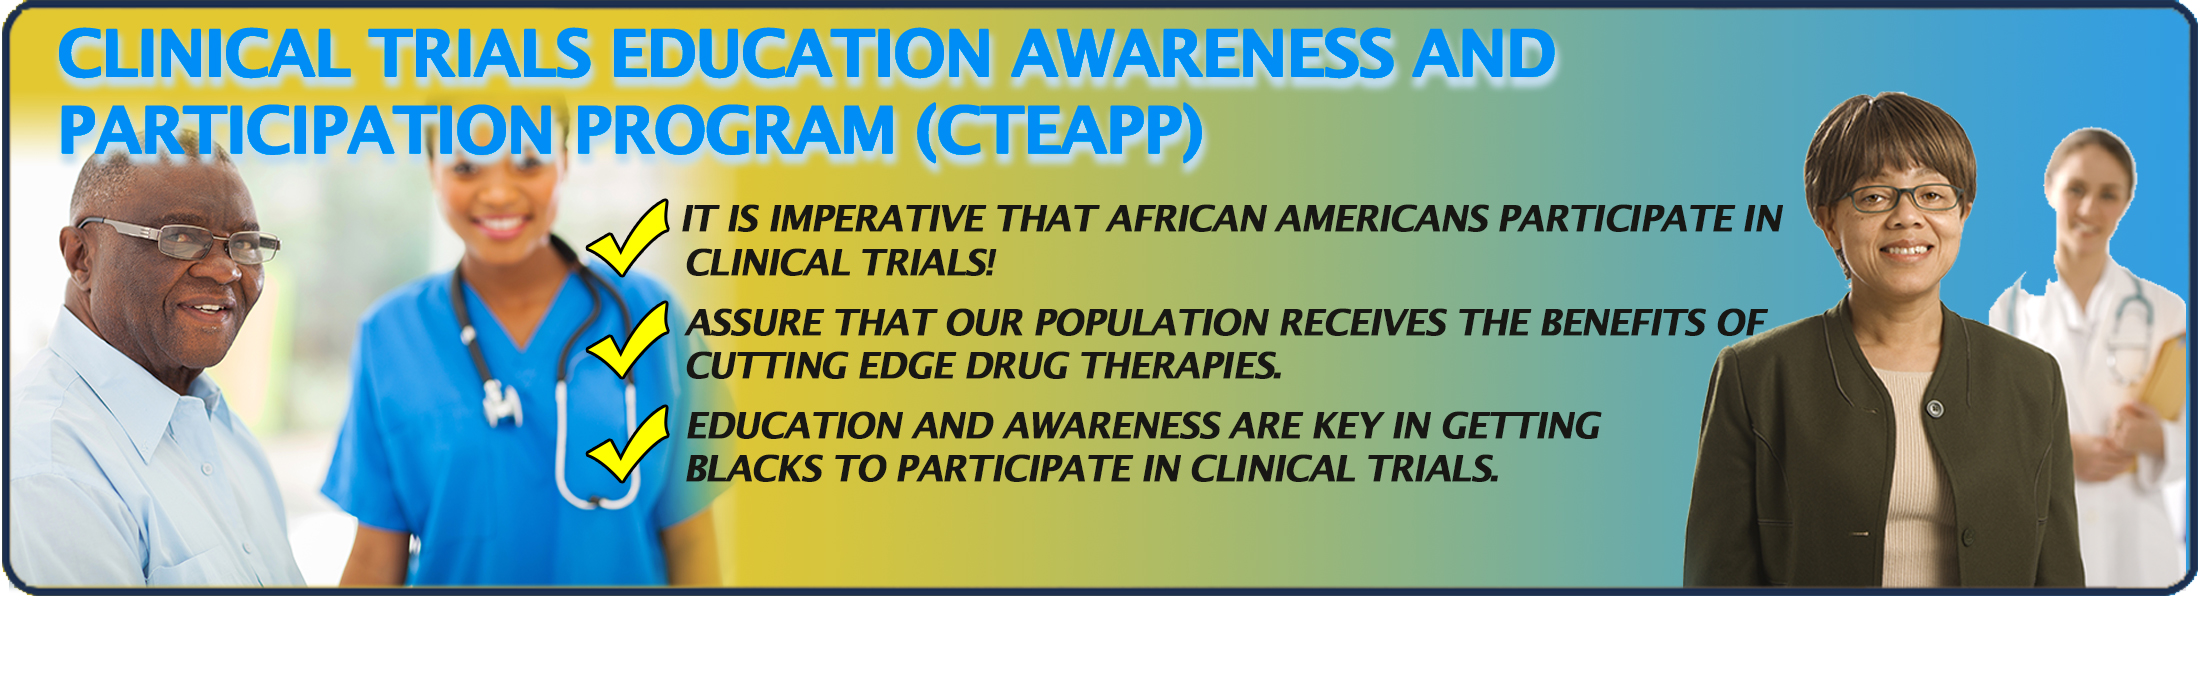 The NBCI Clinical Trials Education Awareness Participation Program (CTEAPP) is another groundbreaking initiative, housed under NBCI's Health Emergency Declaration (HED)